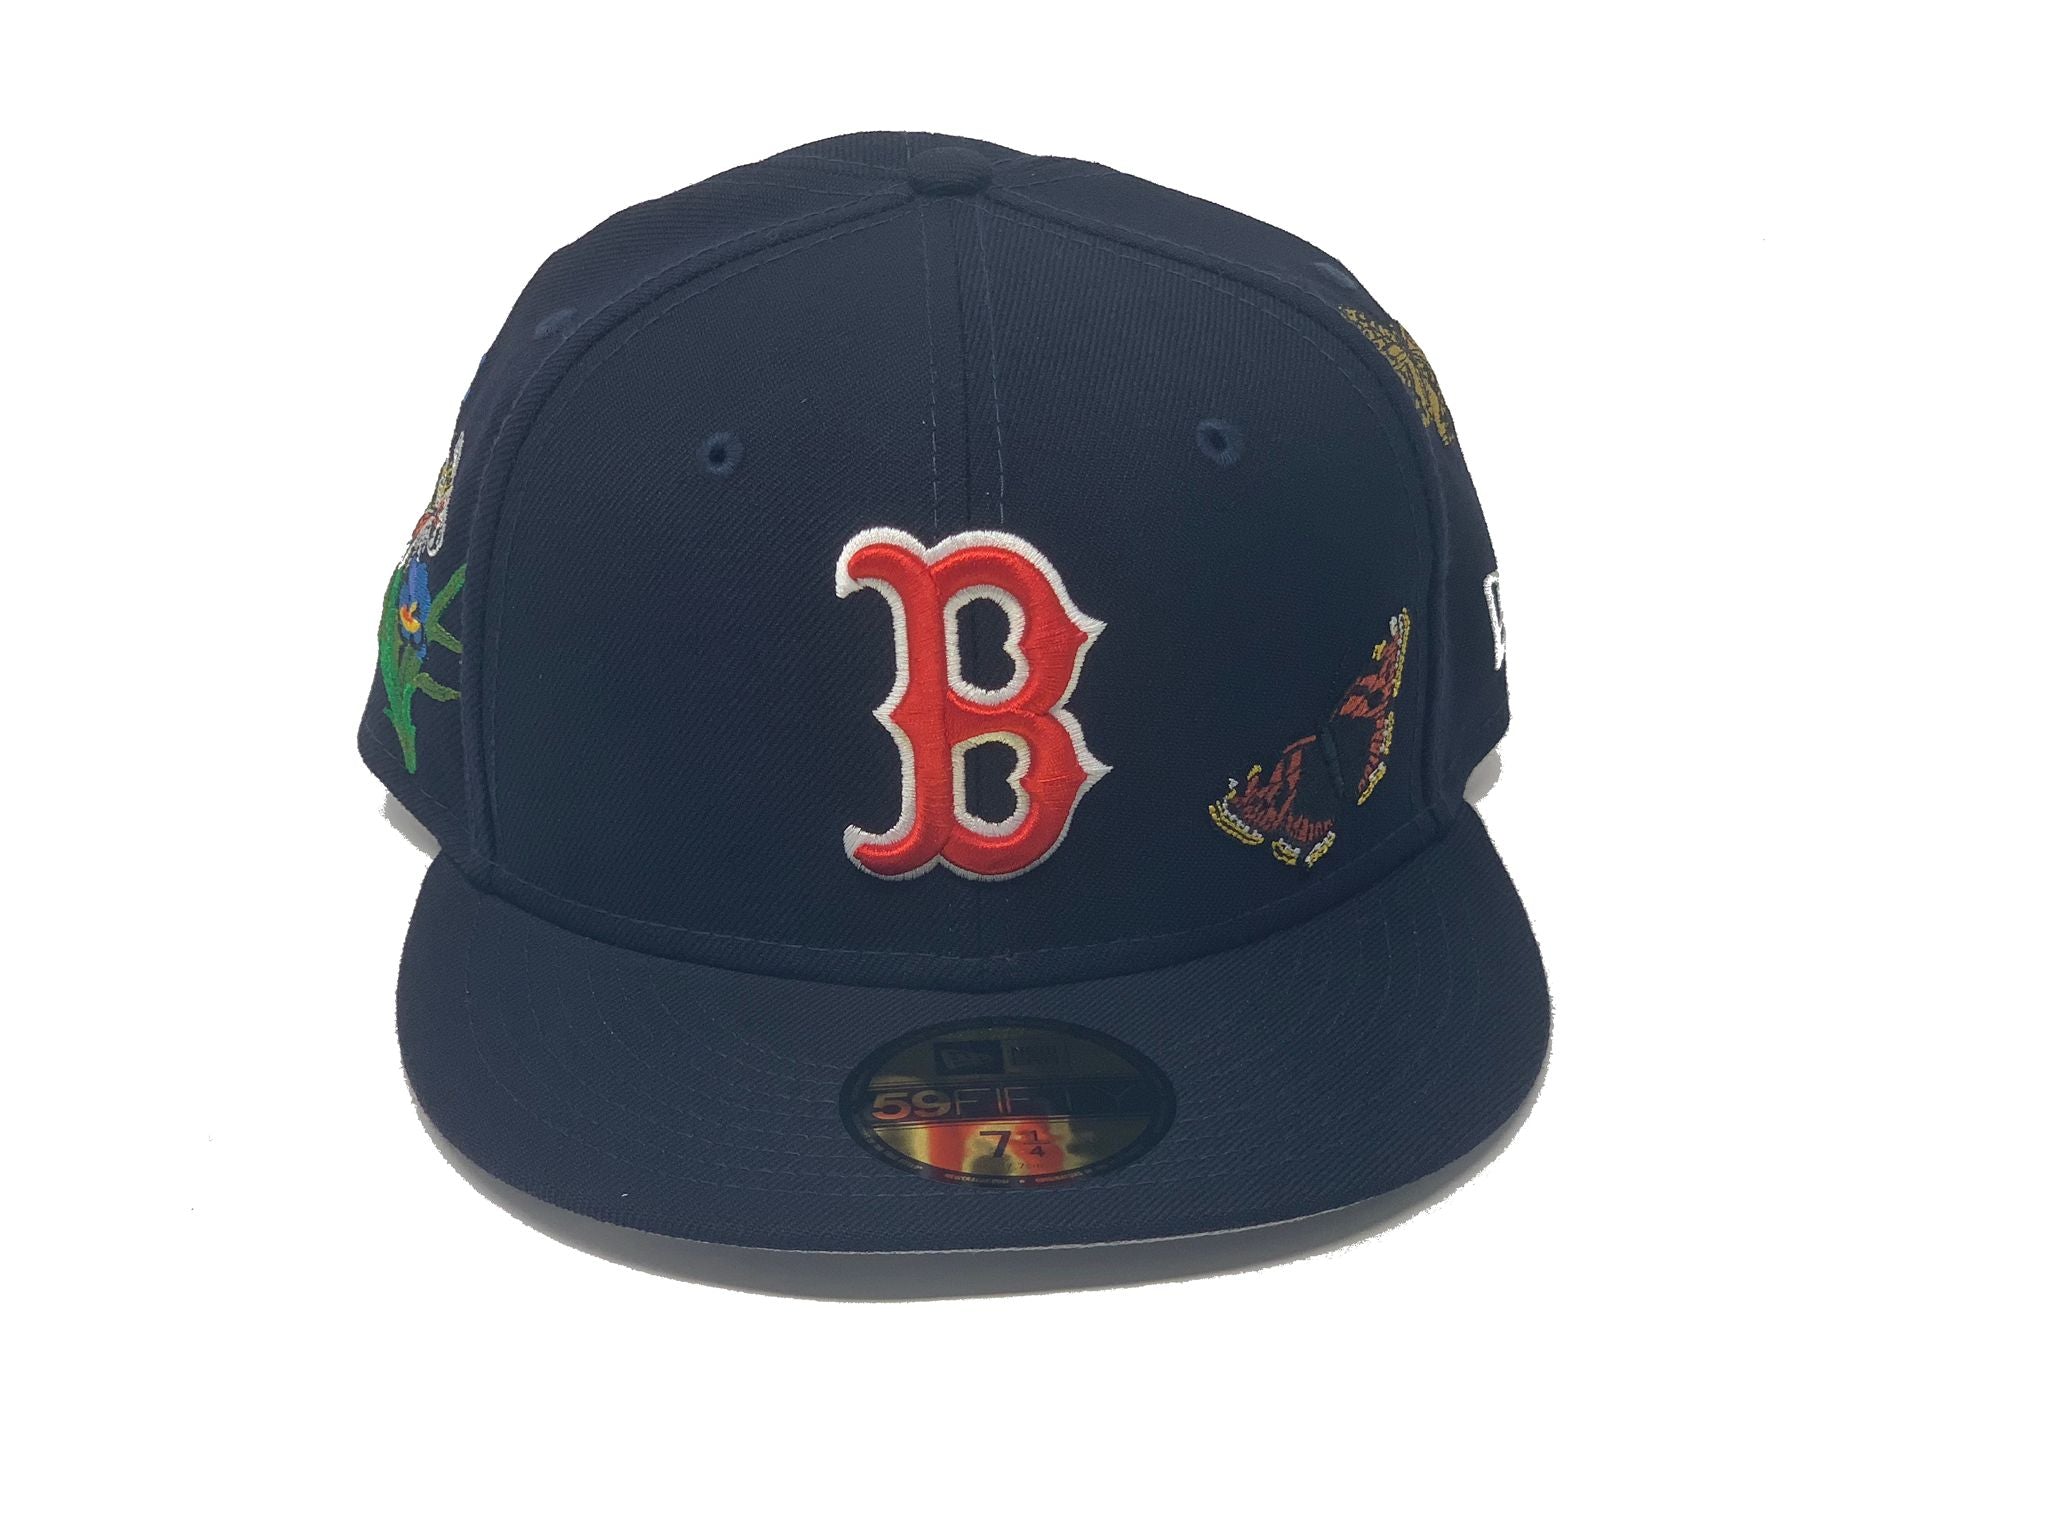 New Era Worcester Red Sox Navy blue 59FIFTY fitted hat cap